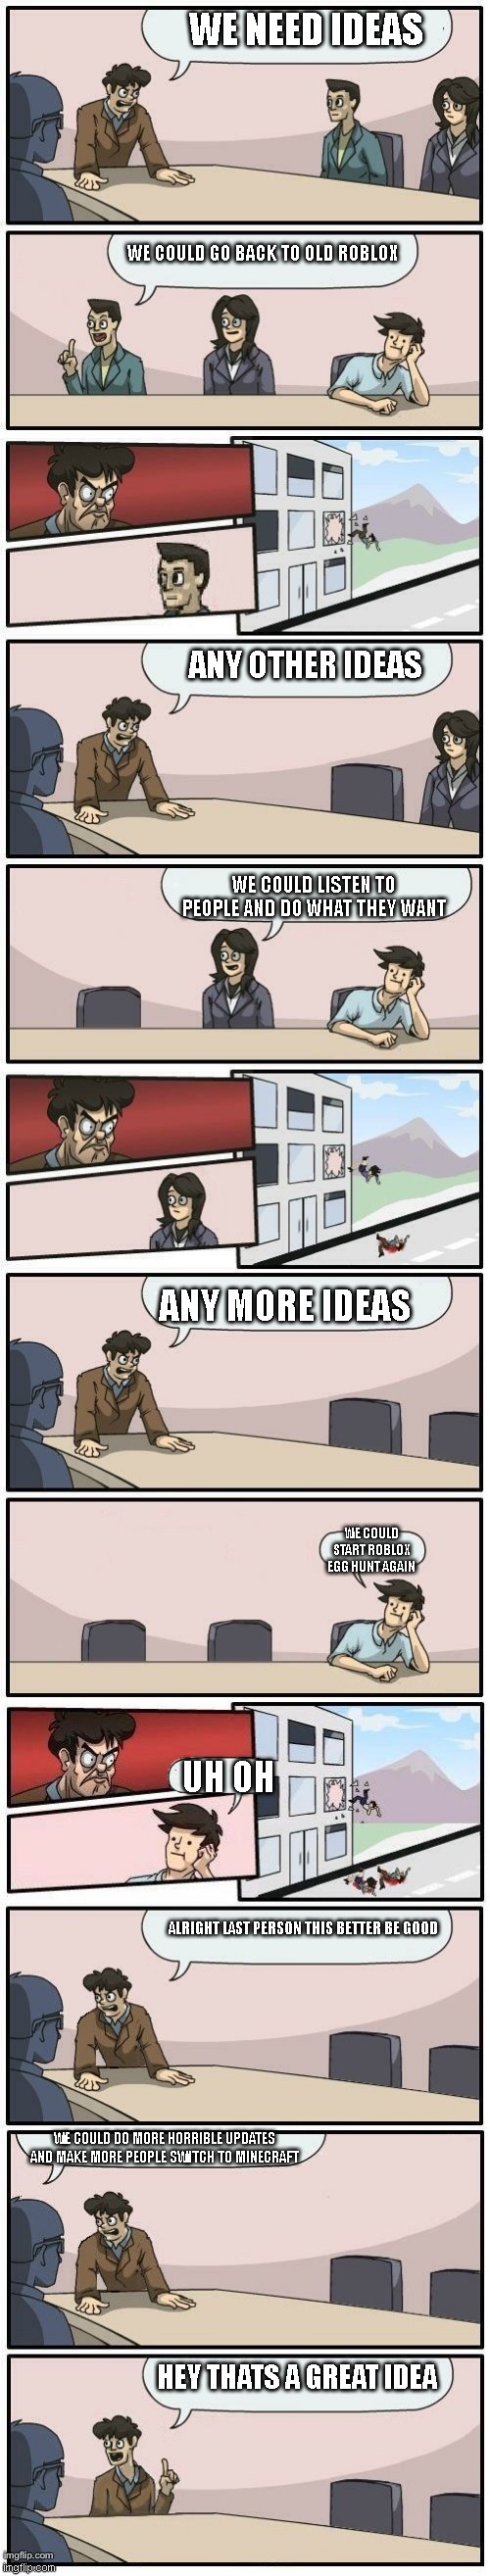 roblox board room meeting suggestions | WE NEED IDEAS; WE COULD GO BACK TO OLD ROBLOX; ANY OTHER IDEAS; WE COULD LISTEN TO PEOPLE AND DO WHAT THEY WANT; ANY MORE IDEAS; WE COULD START ROBLOX EGG HUNT AGAIN; UH OH; ALRIGHT LAST PERSON THIS BETTER BE GOOD; WE COULD DO MORE HORRIBLE UPDATES AND MAKE MORE PEOPLE SWITCH TO MINECRAFT; HEY THATS A GREAT IDEA | image tagged in boardroom meeting suggestions extended | made w/ Imgflip meme maker